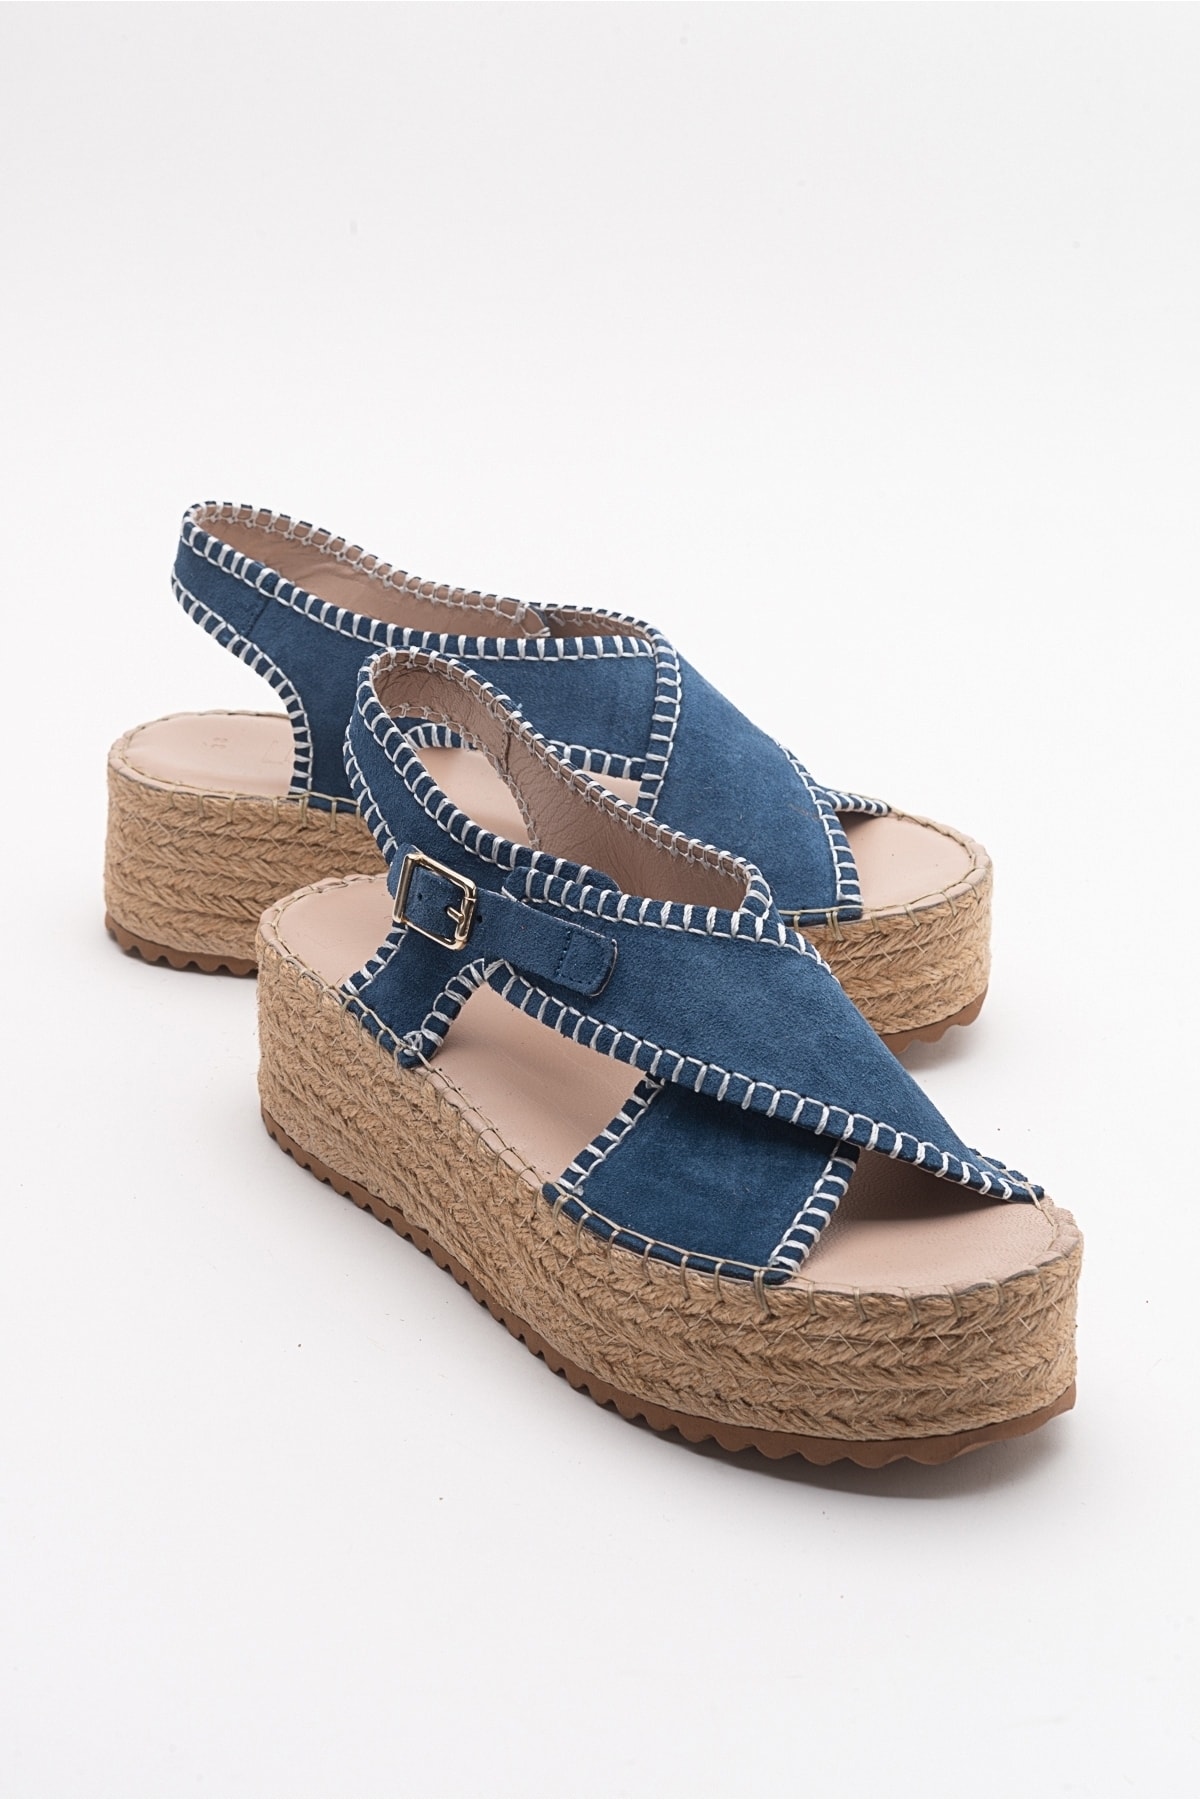 LuviShoes Bellezza Jeans Women's Blue Suede Genuine Leather Sandals